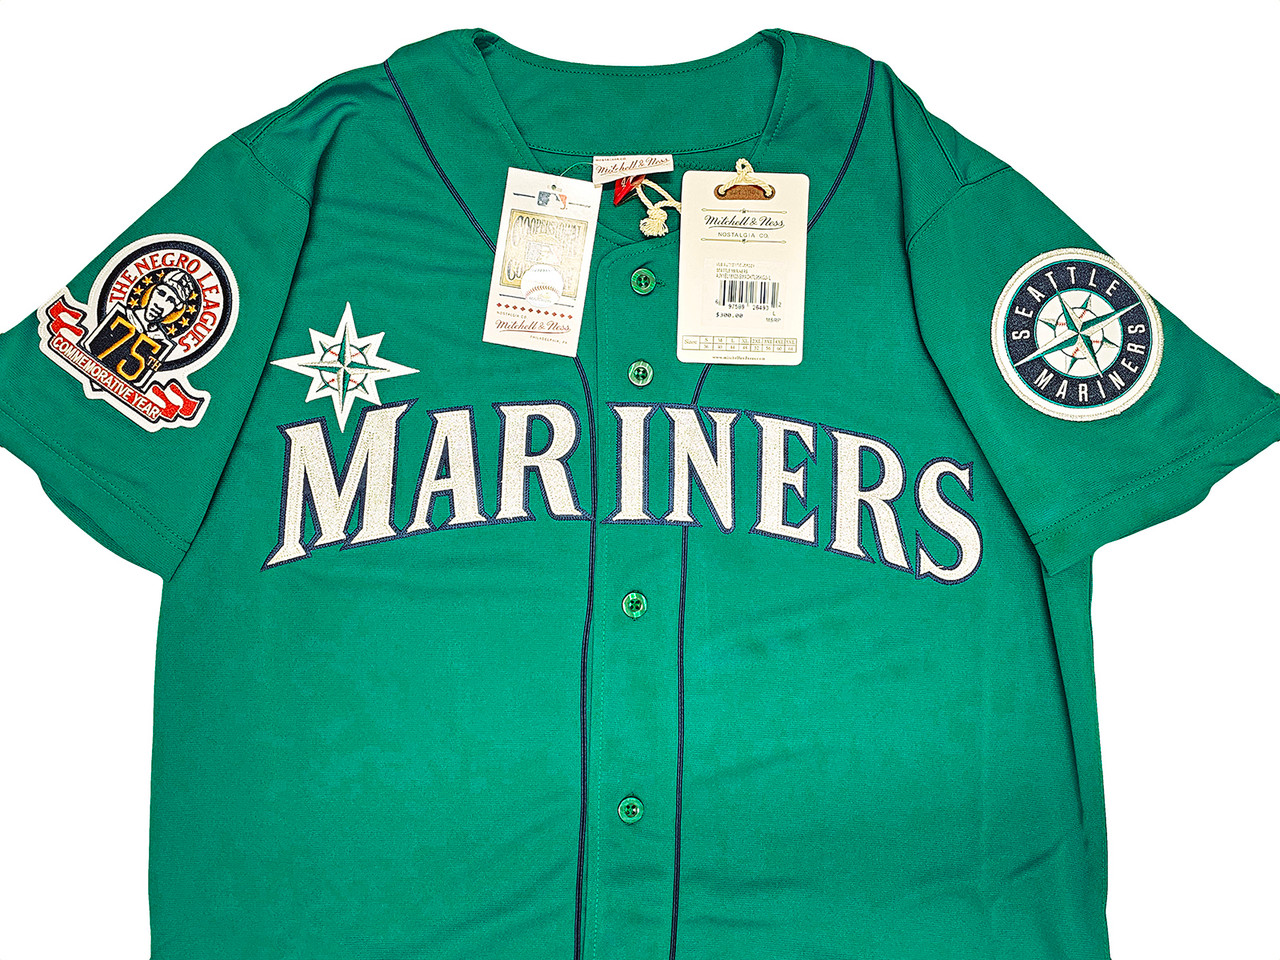 Ken Griffey Jr. Seattle Mariners Fanatics Authentic Autographed Mitchell &  Ness Authentic Jersey - Teal